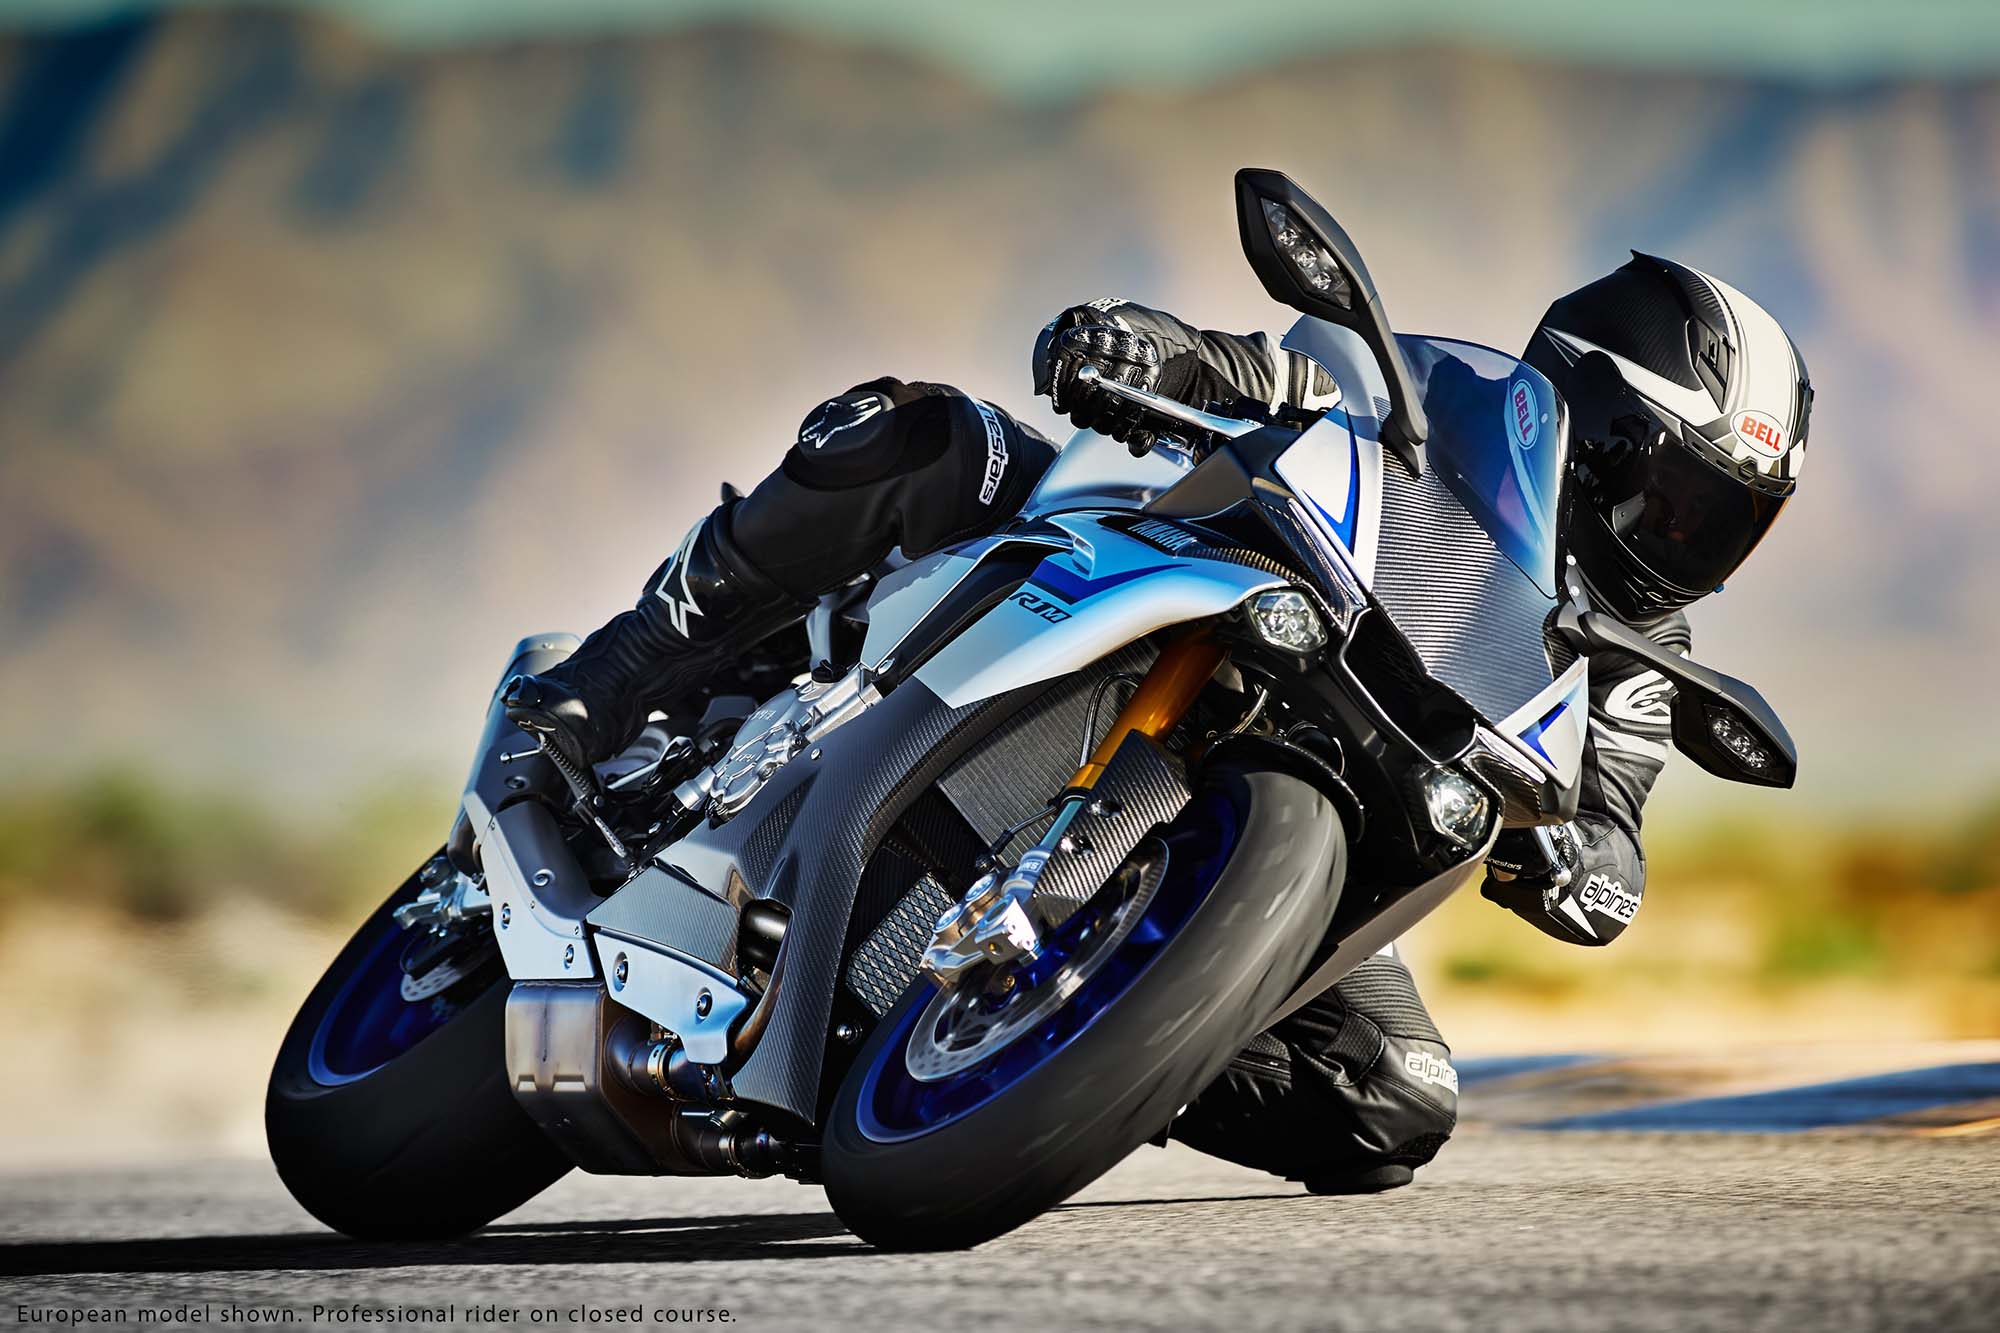 2015 Yamaha YZF-R1M - An Exclusive Track Weapon - Asphalt & Rubber